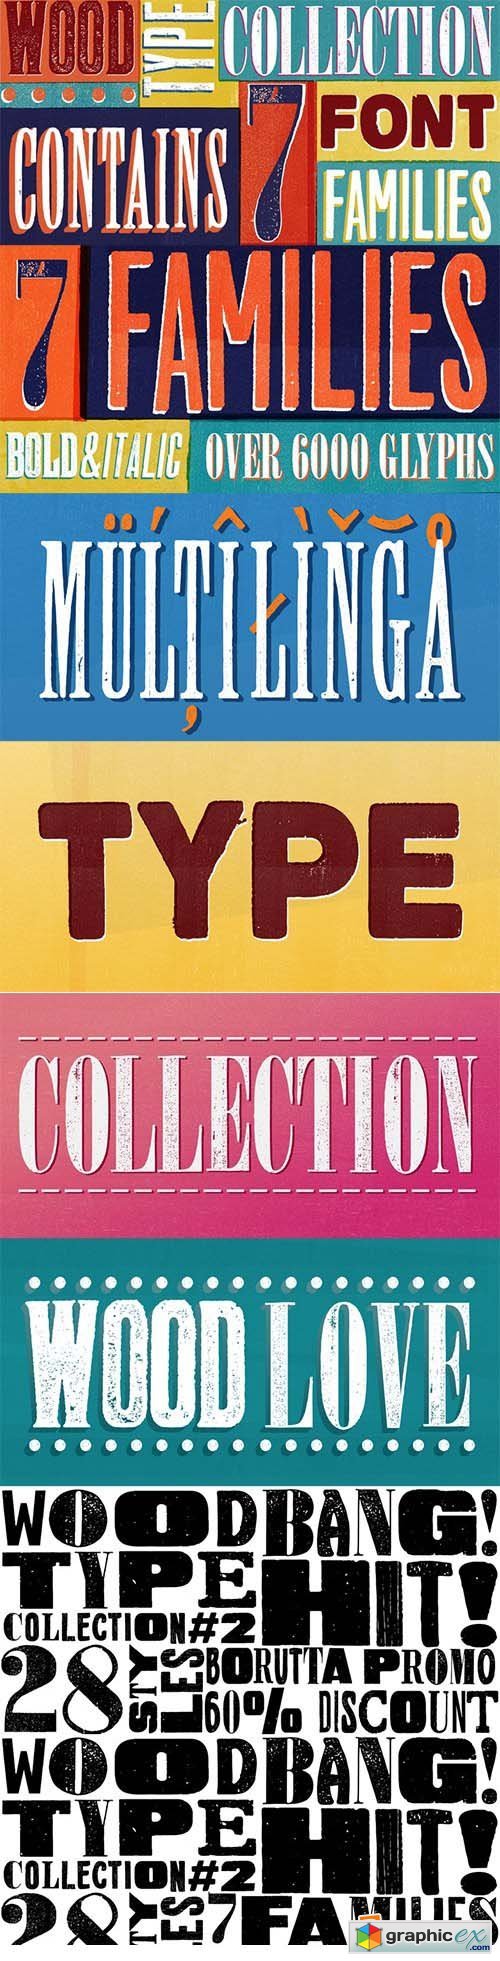 Wood Type Collection Font Family - 39 Font $390